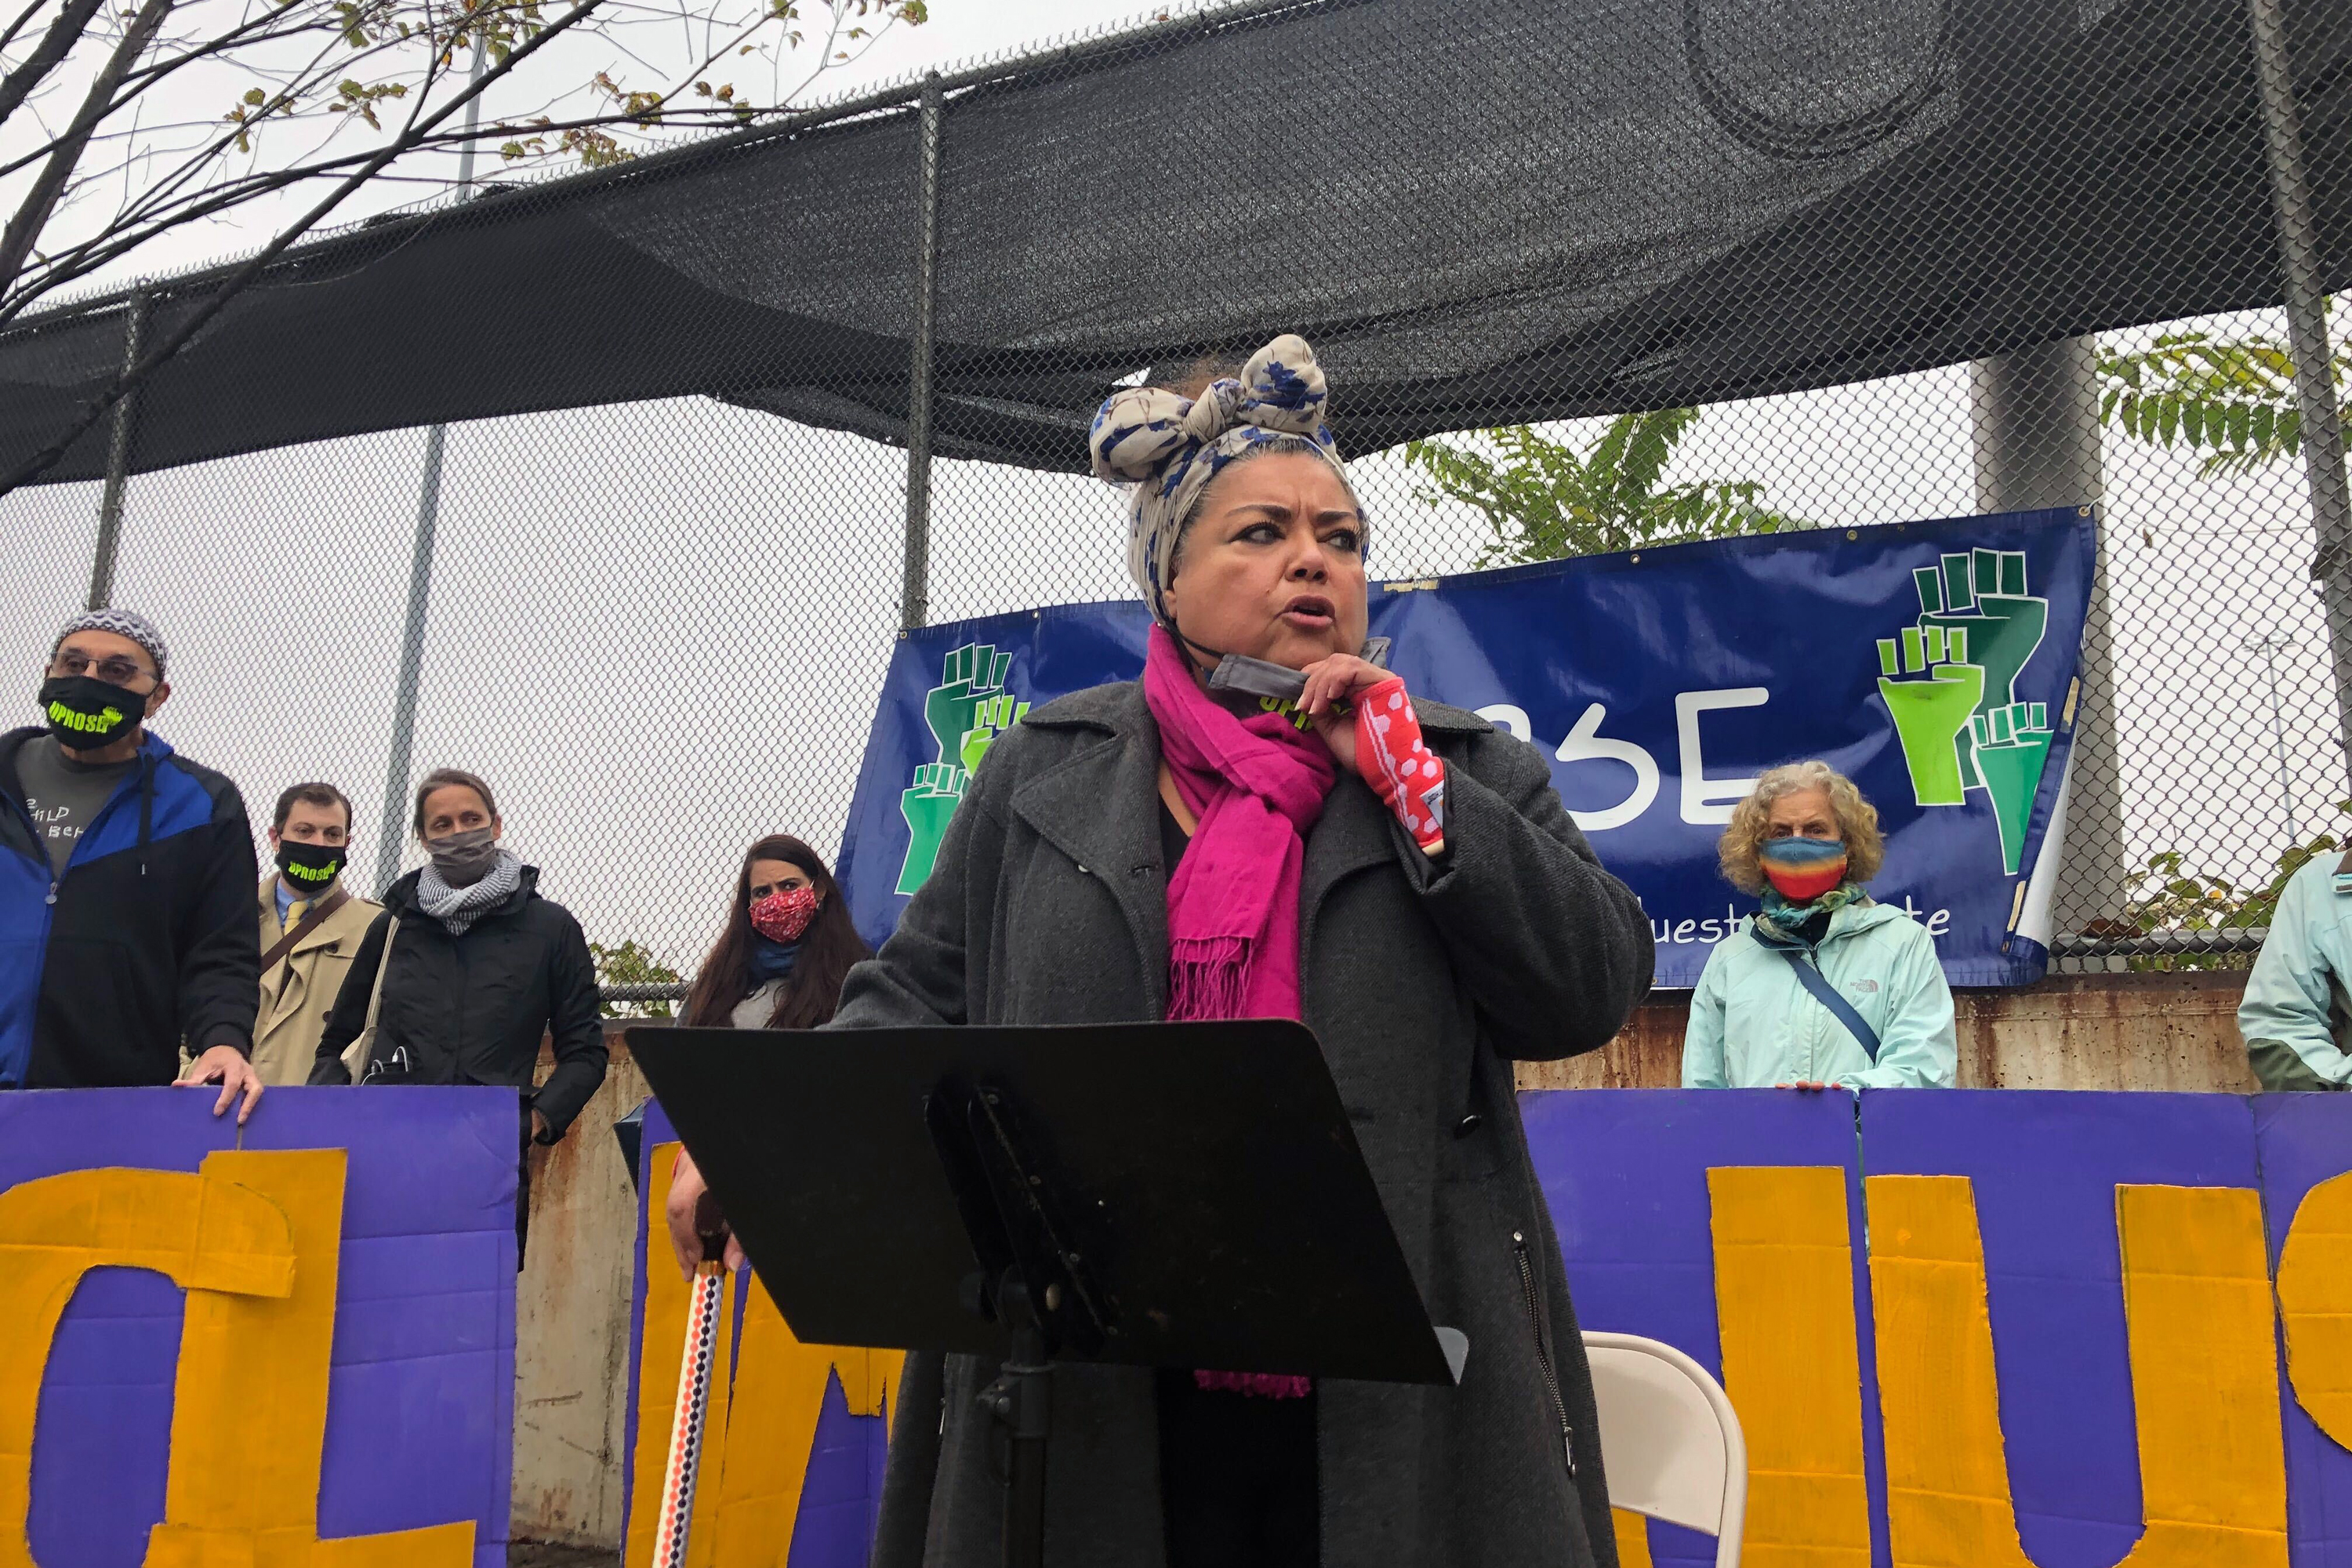 UPROSE Executive Director Elizabeth Yeampierre speaks at a press conference calling for the state to invest $200 million to turn the South Brooklyn Marine Terminal into an offshore wind port and clean energy hub, Oct. 28, 2020.